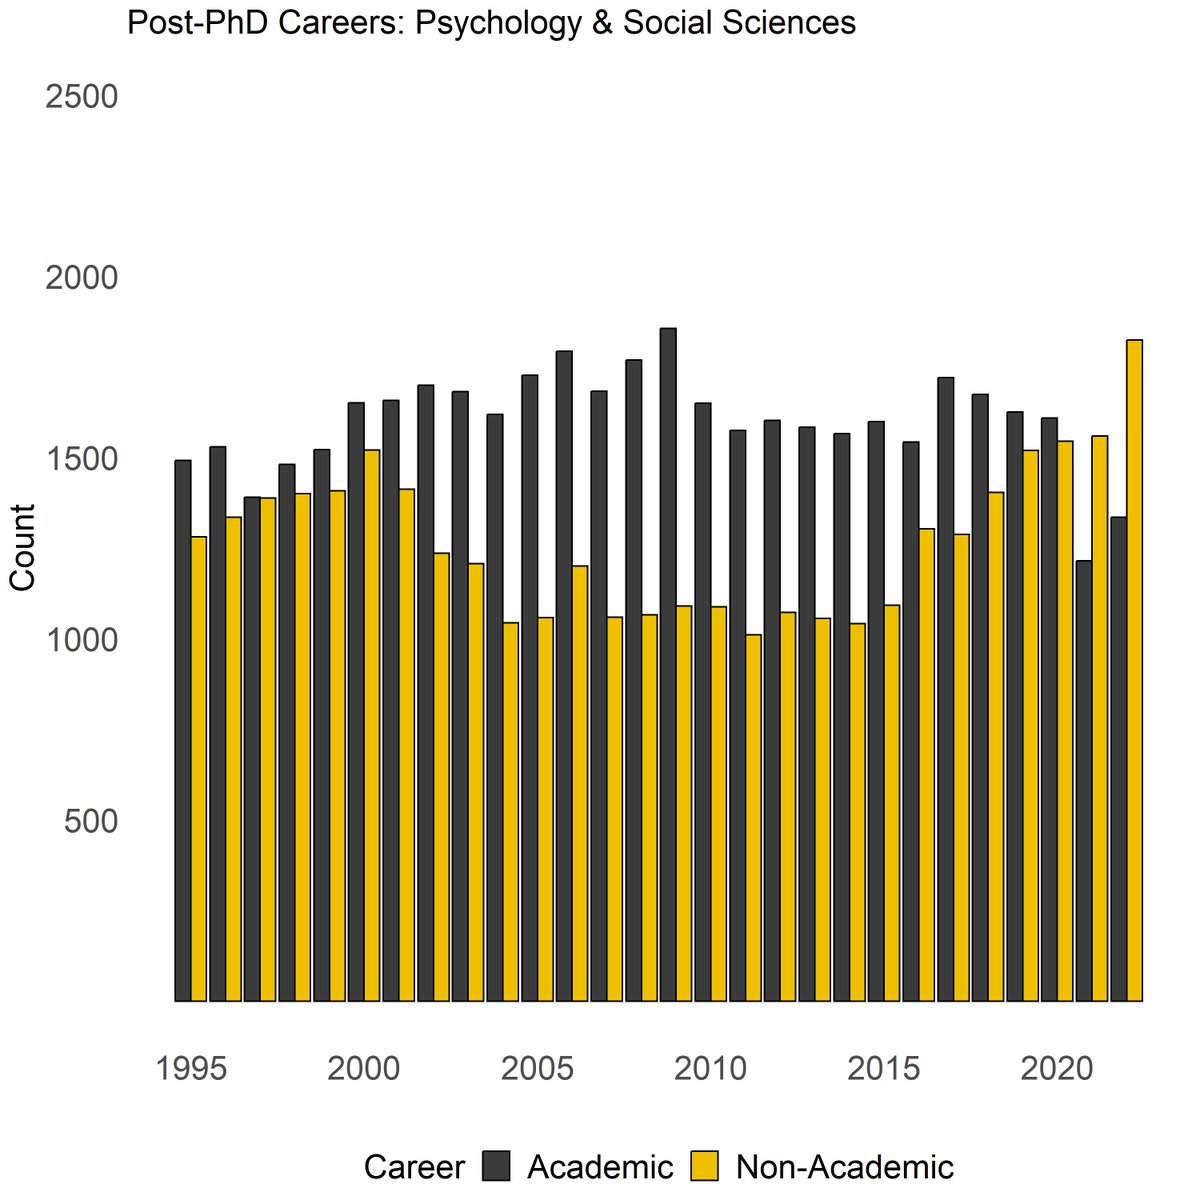 Psychology and Social Sciences PhDs have chosen non-academic careers > academic careers since 2021. We've only recently made the switch. 6/